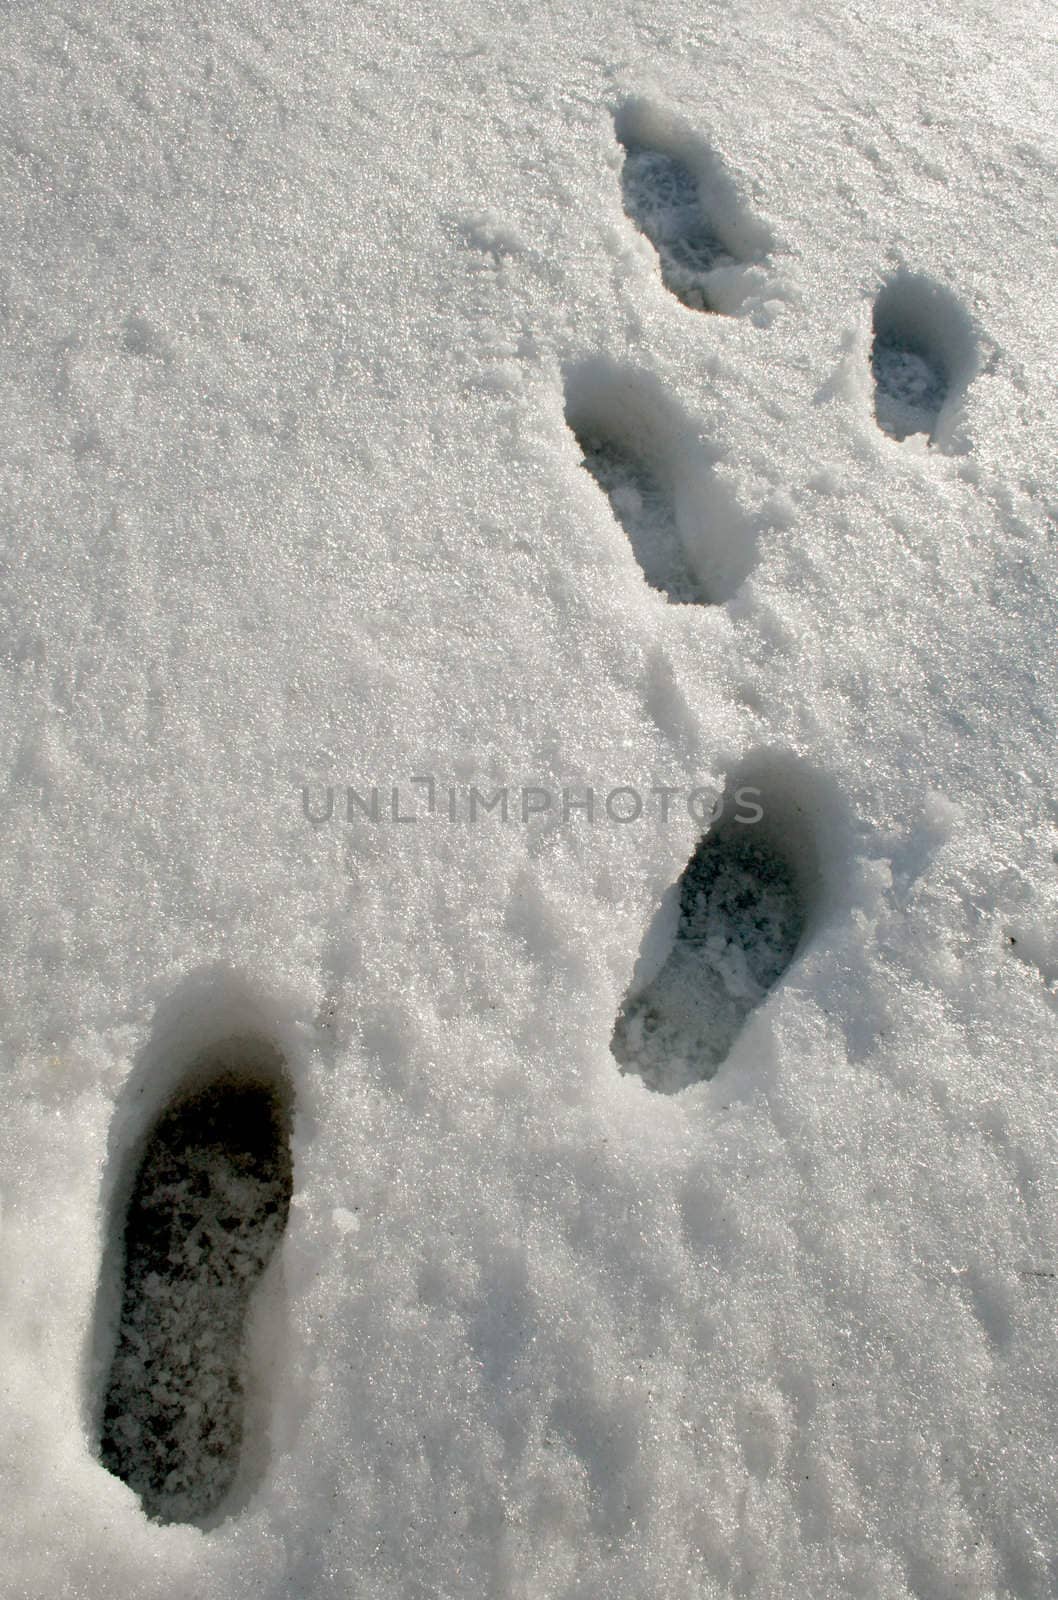 Footprints in the icy snow.